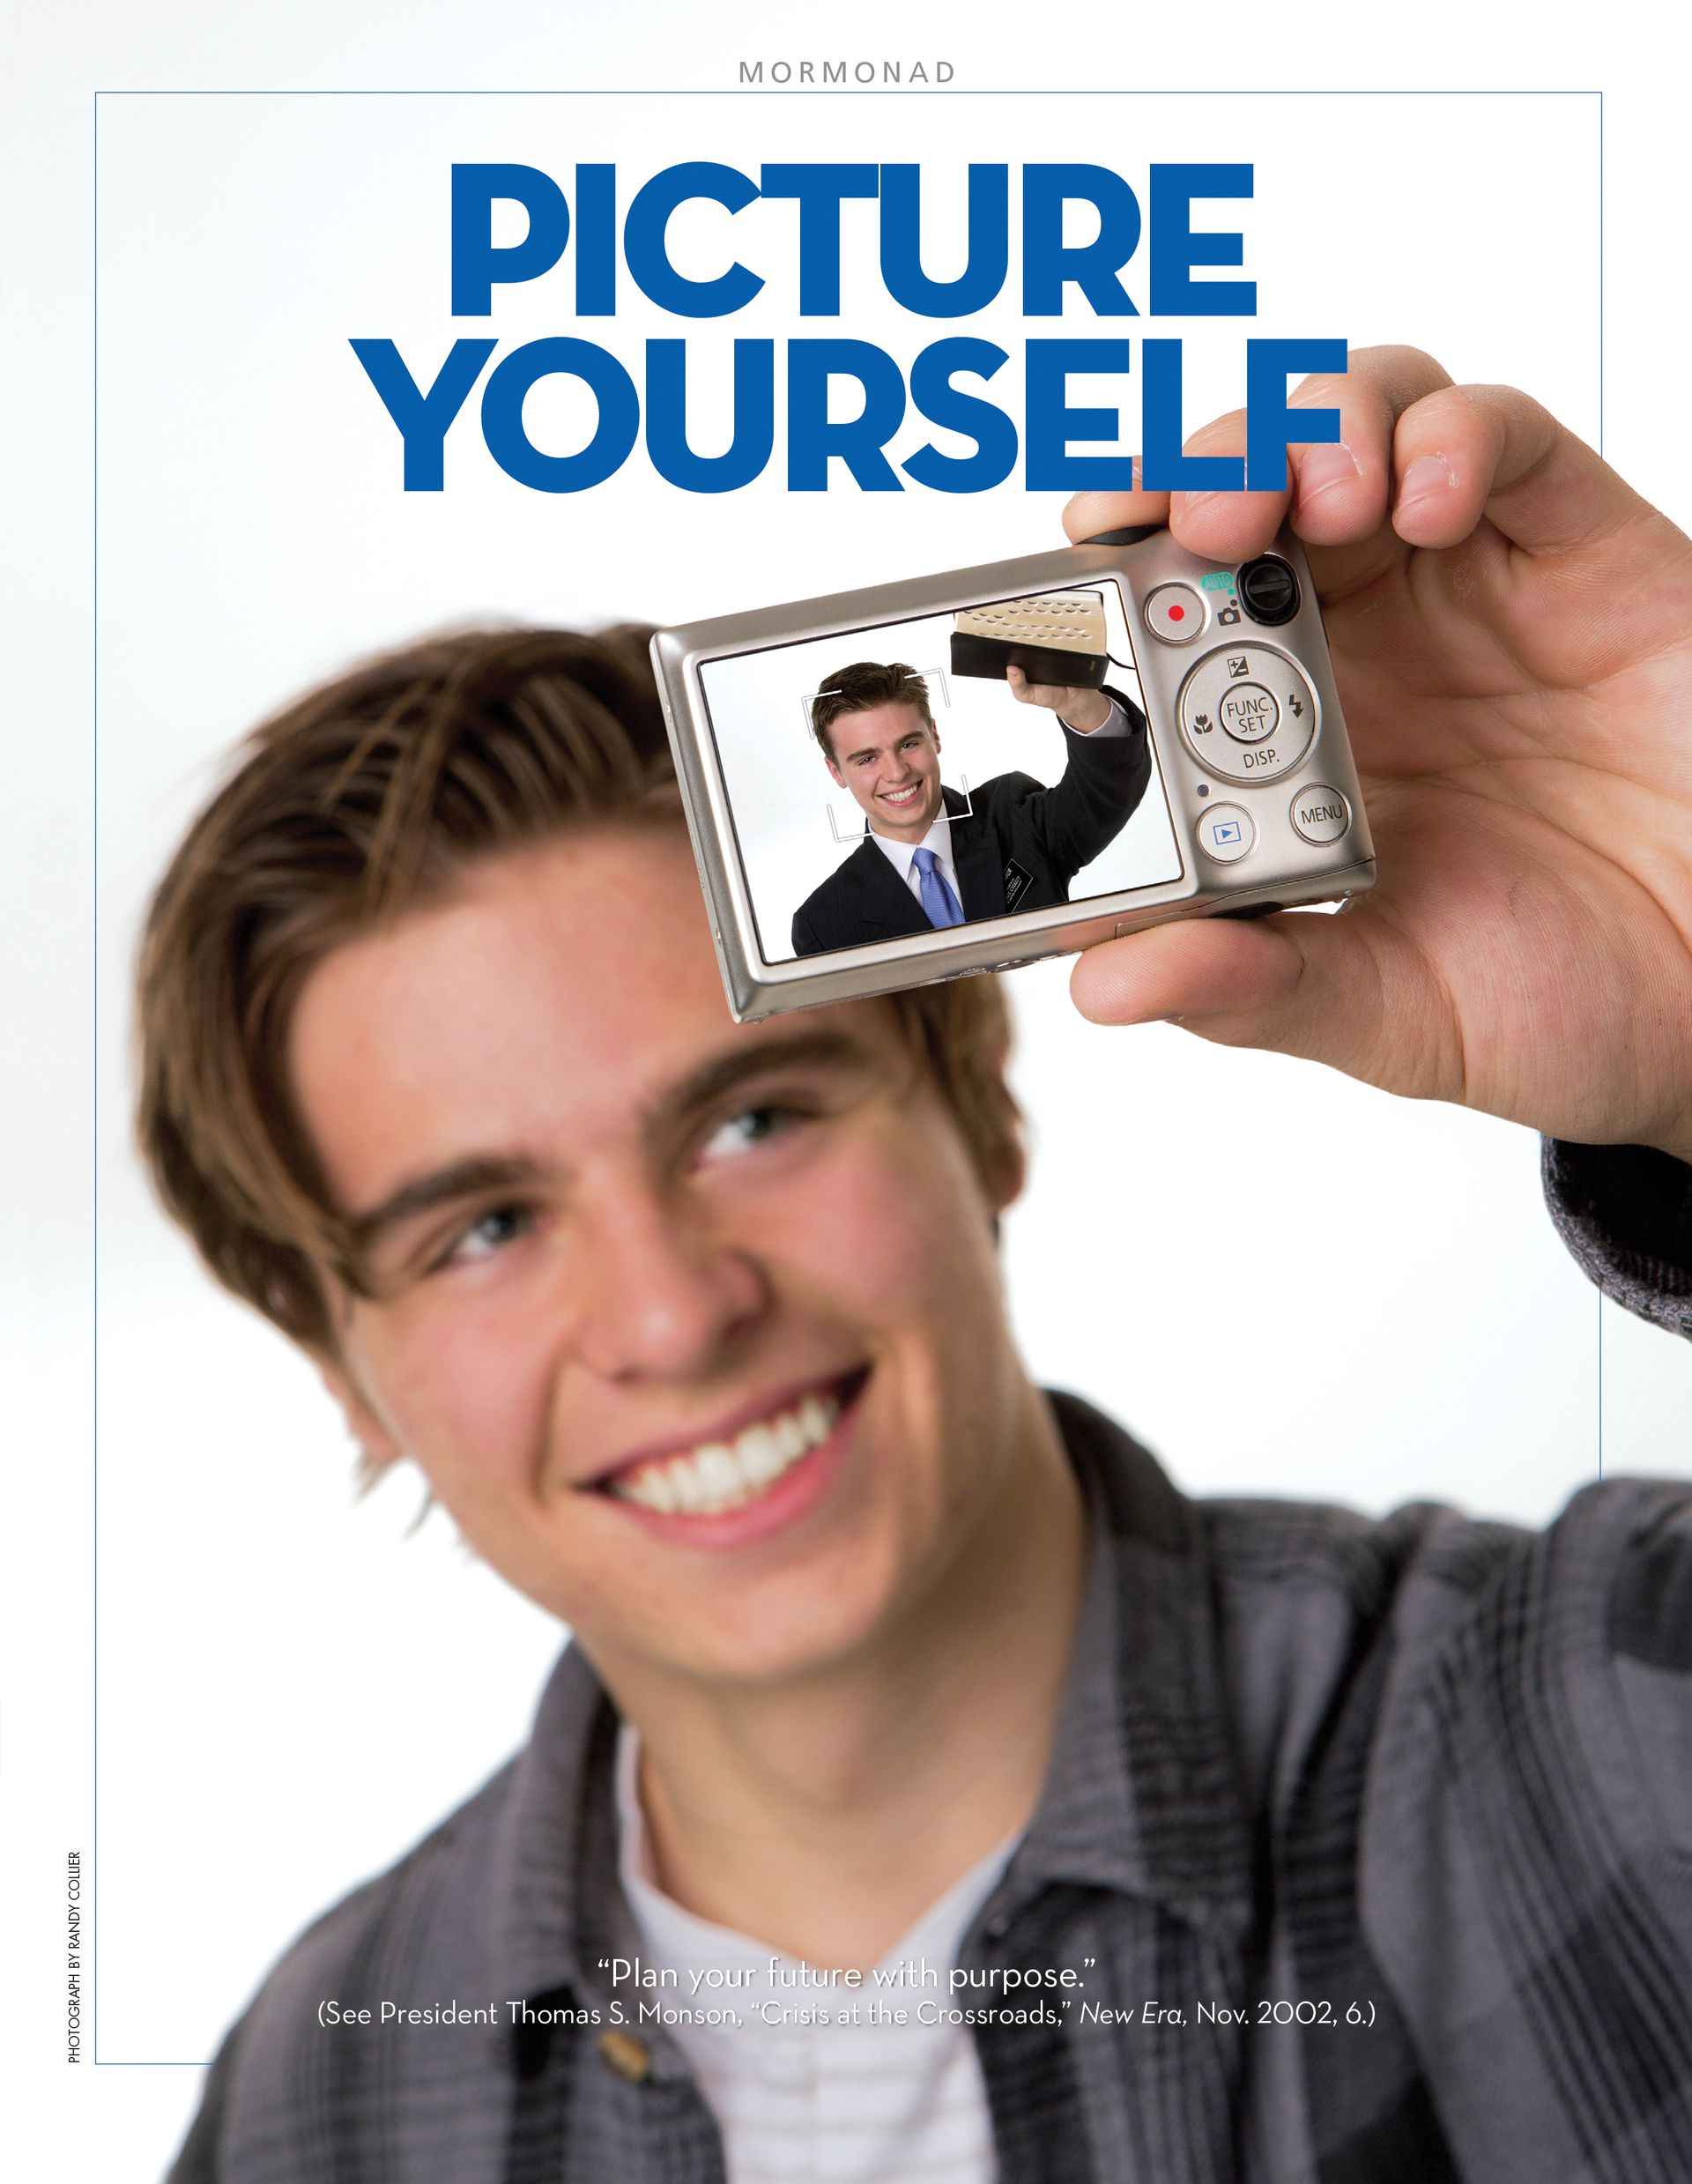 Picture Yourself. “Plan your future with purpose.” (See President Thomas S. Monson, “Crisis at the Crossroads,” New Era, Nov. 2002, 6.) Aug. 2012 © undefined ipCode 1.